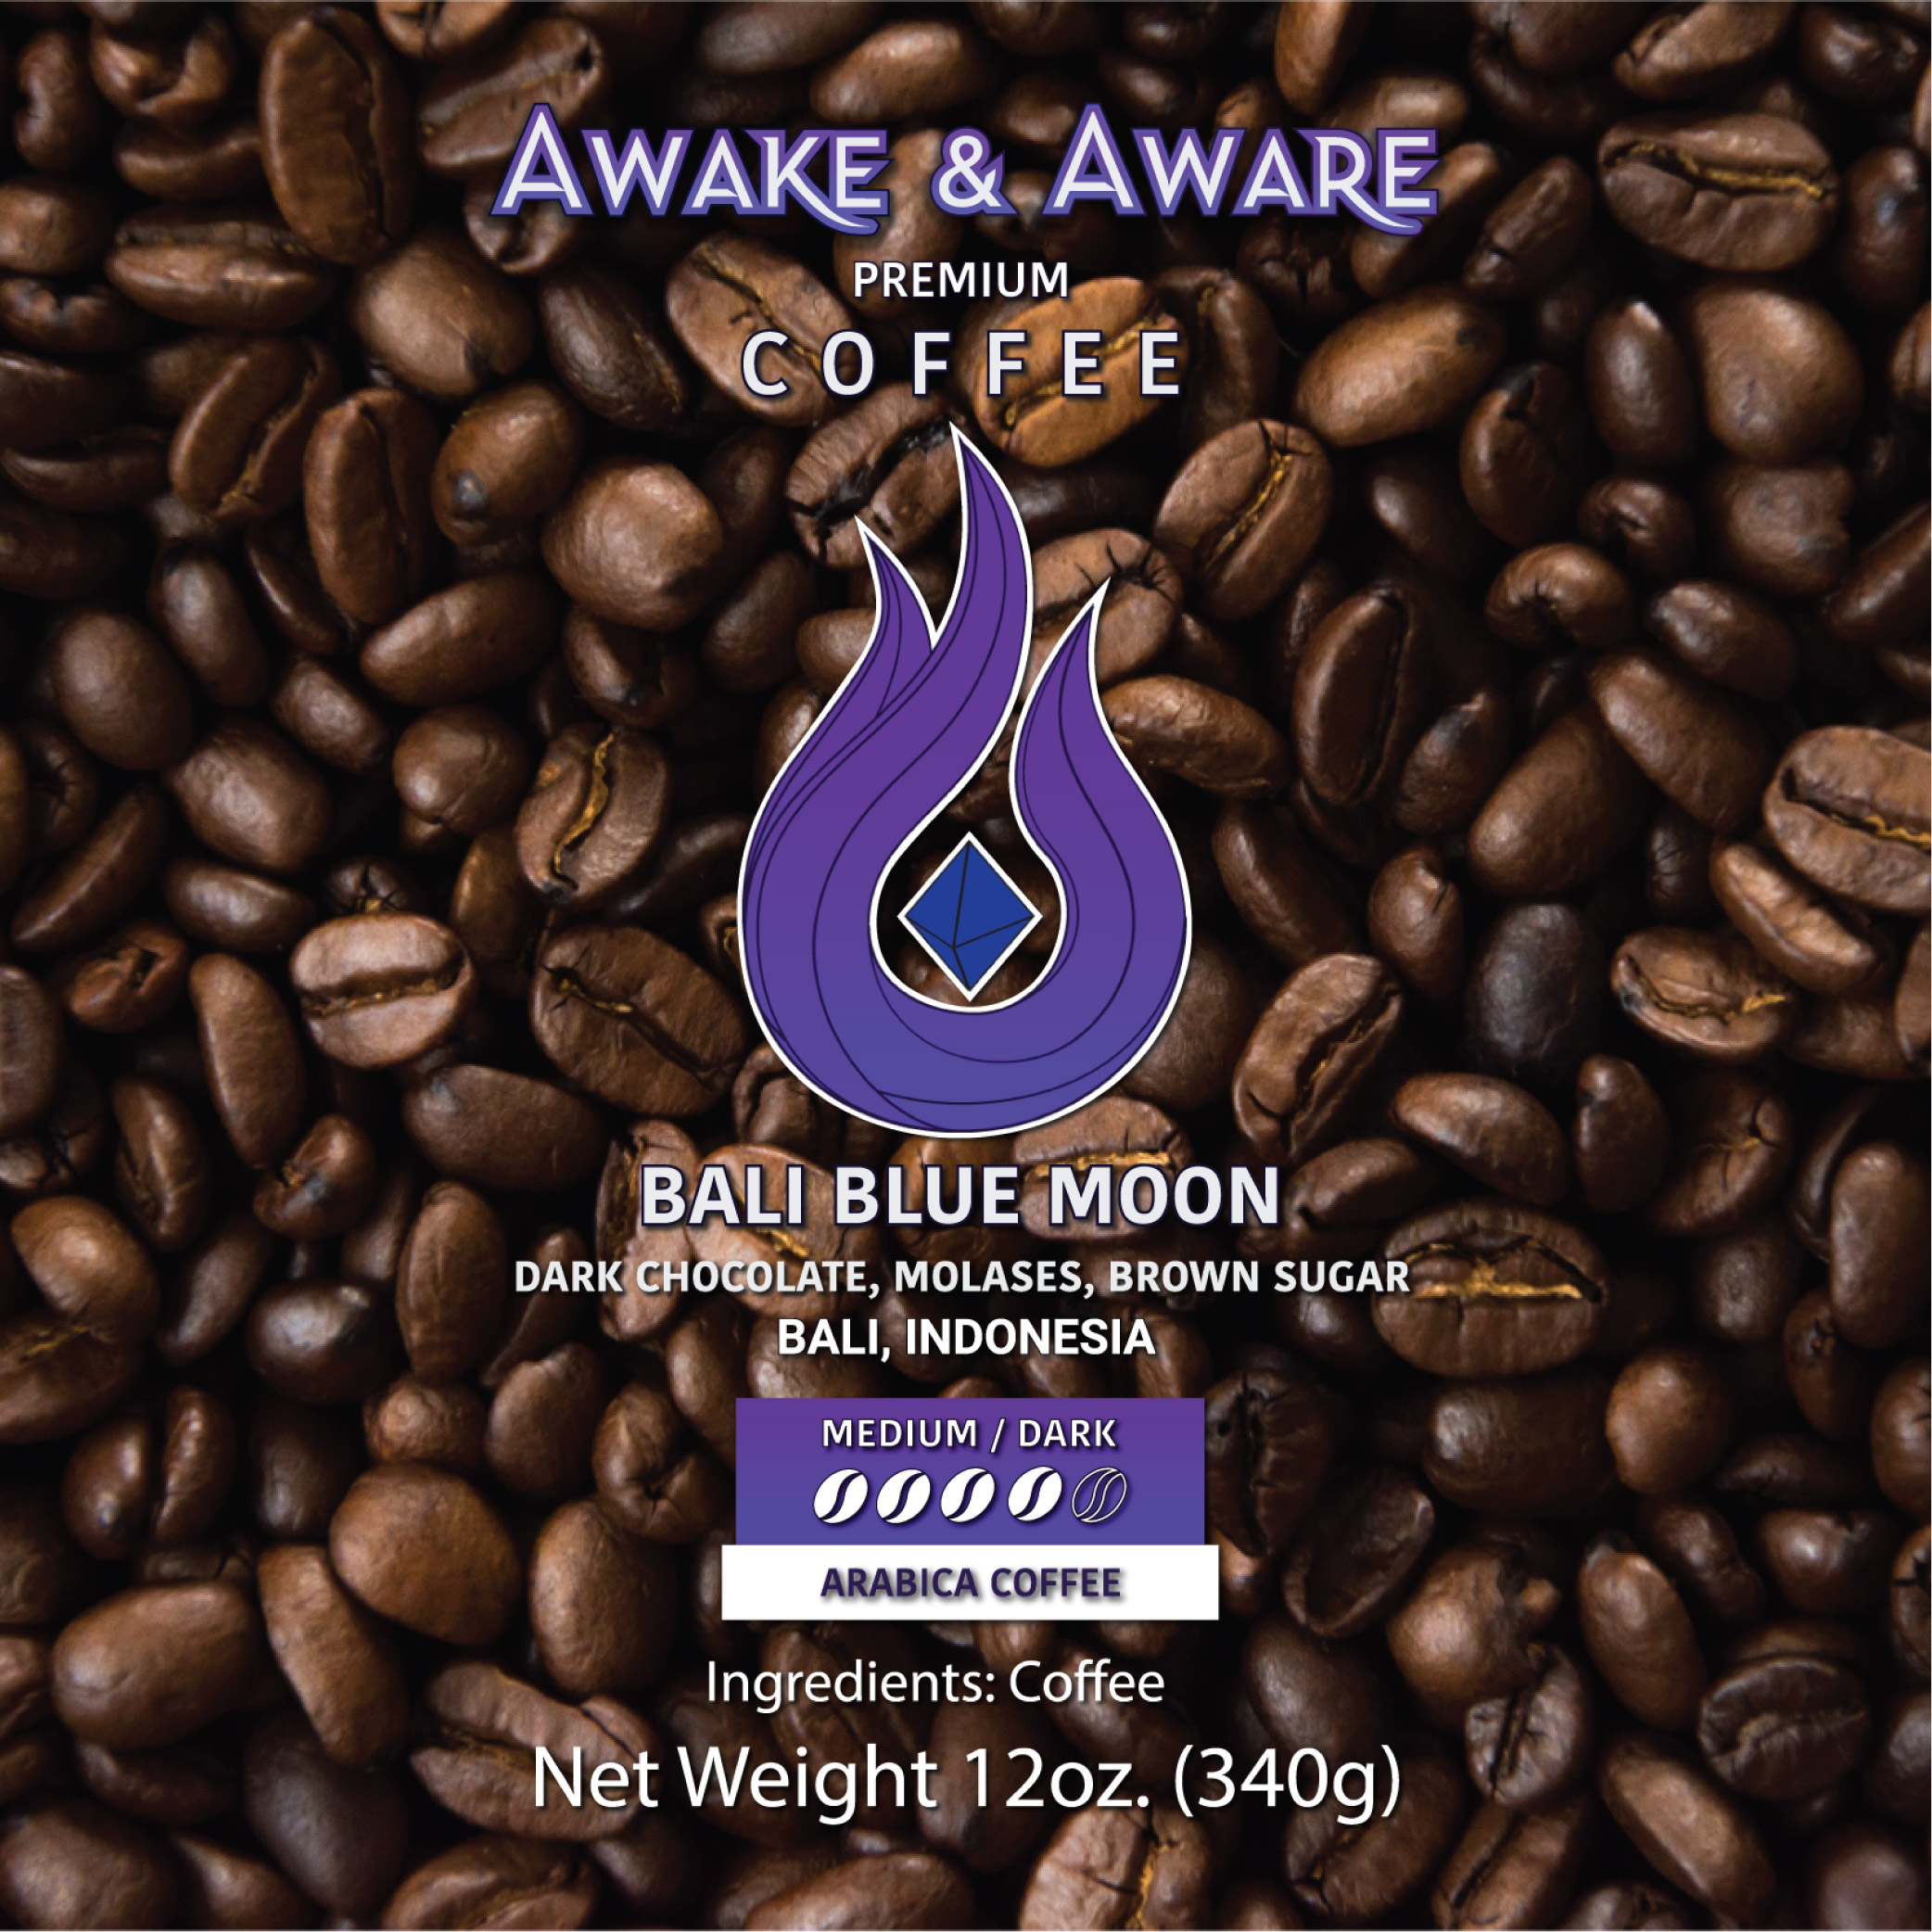 Awake-&-Aware-Bali-Blue-Moon-Beans-With-Clear-Label